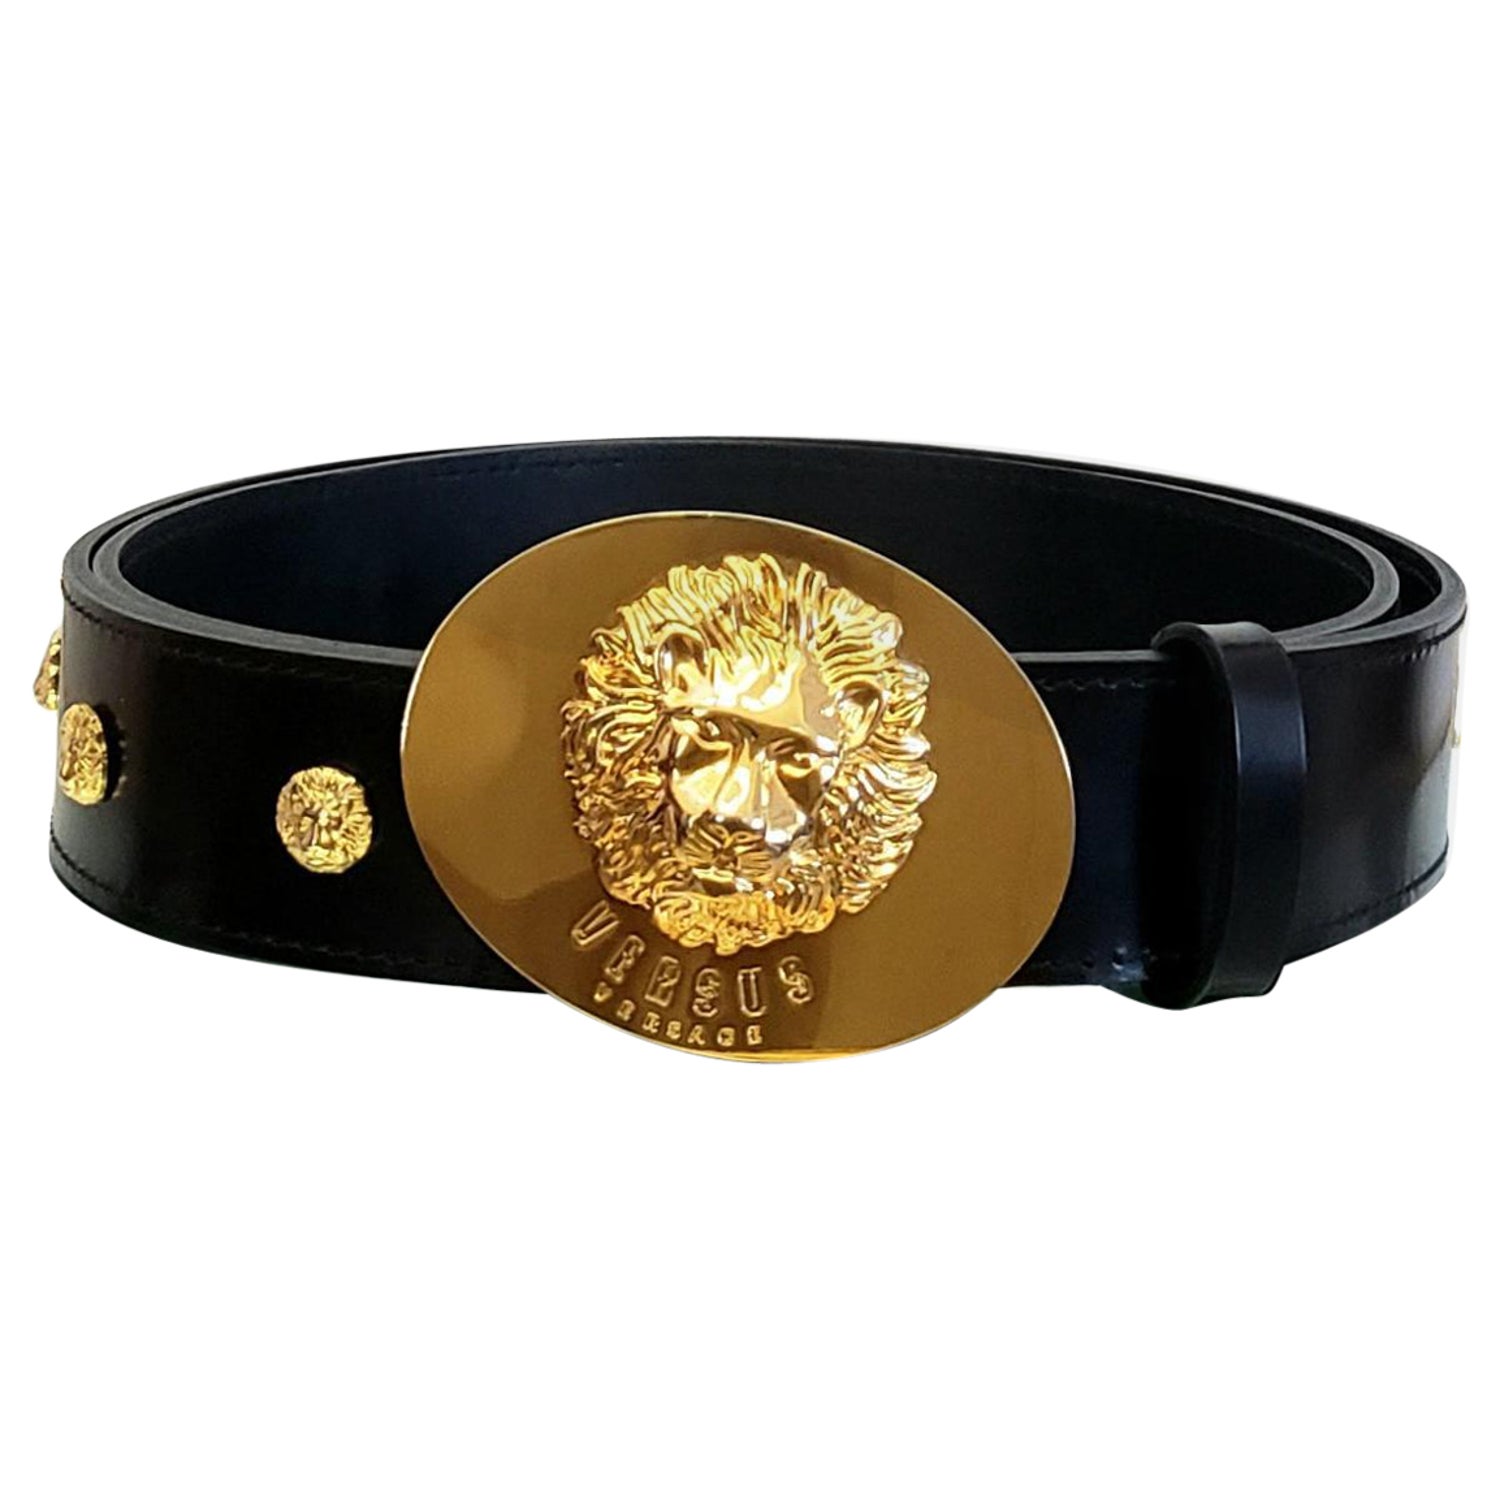 VC 24K Gold Buckle with Black/Brown Reversible Leather Belt Strap - Veyron  Calanari